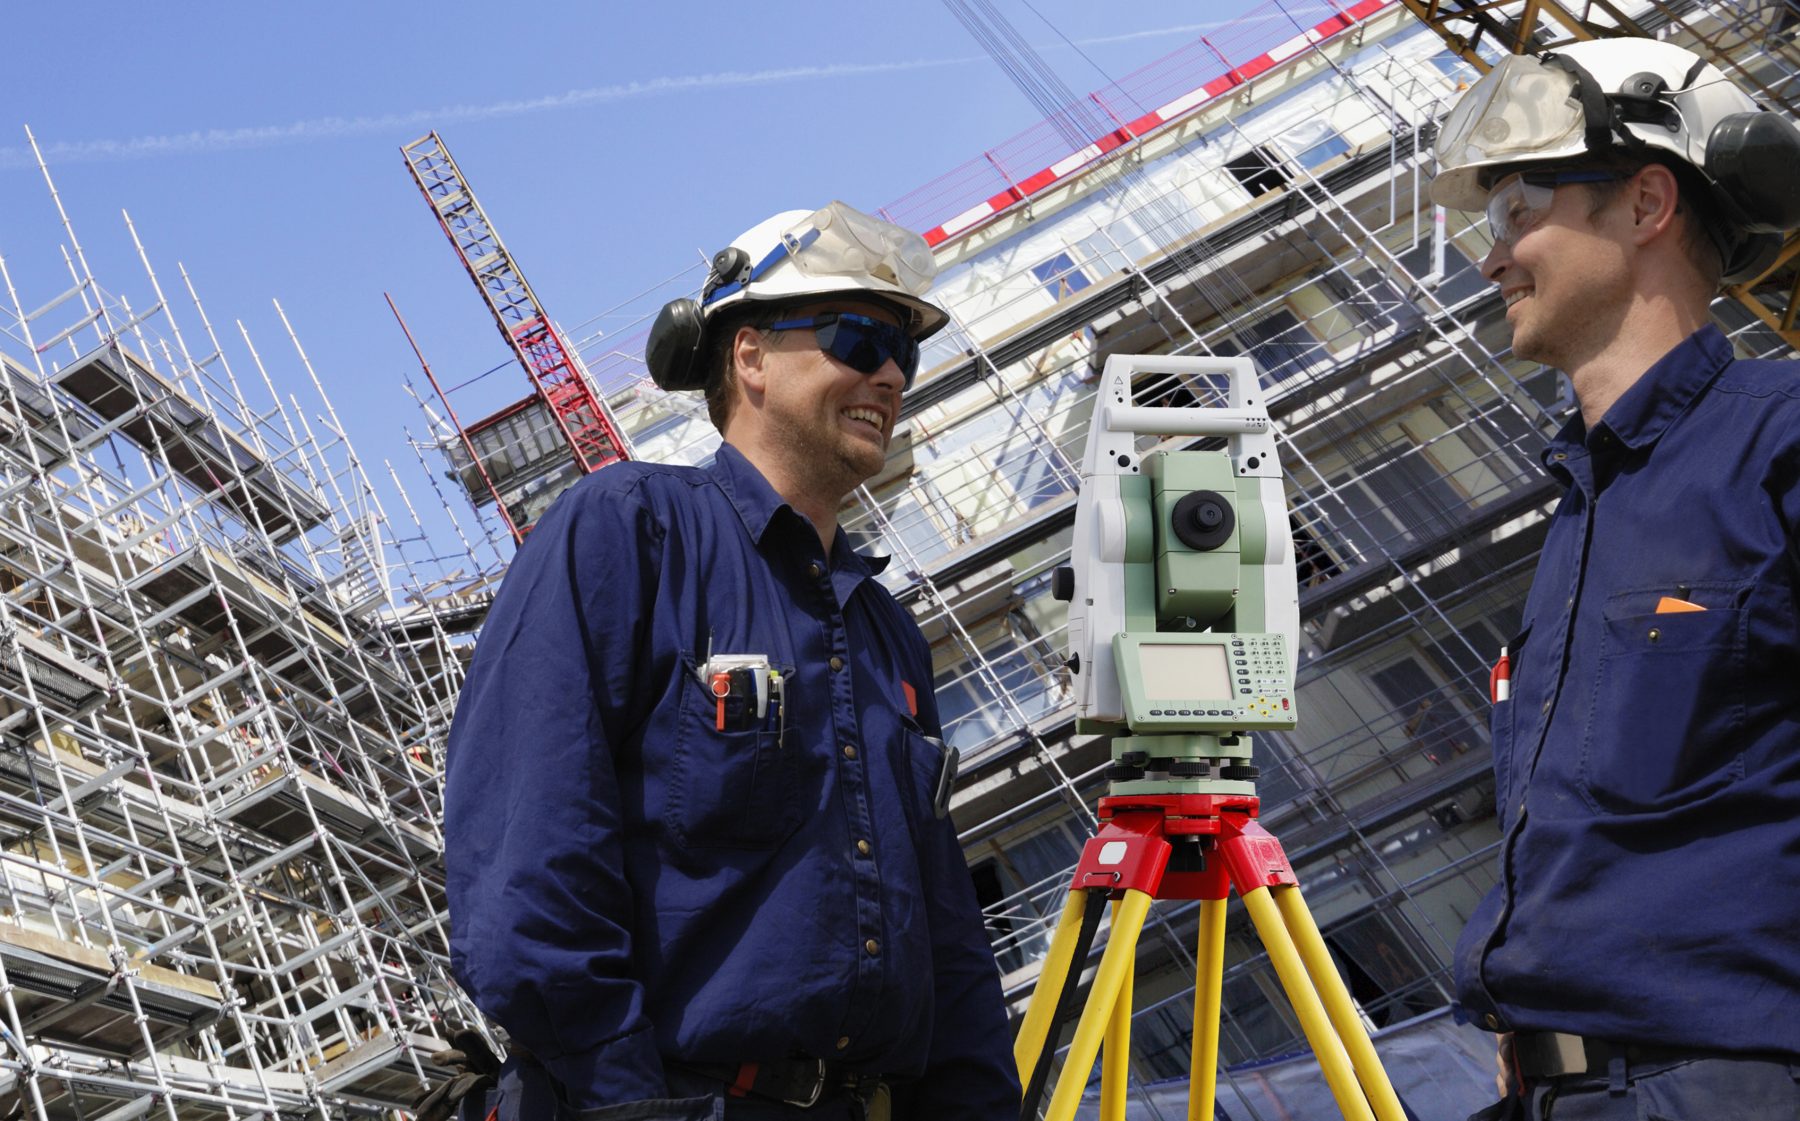 surveying and construction